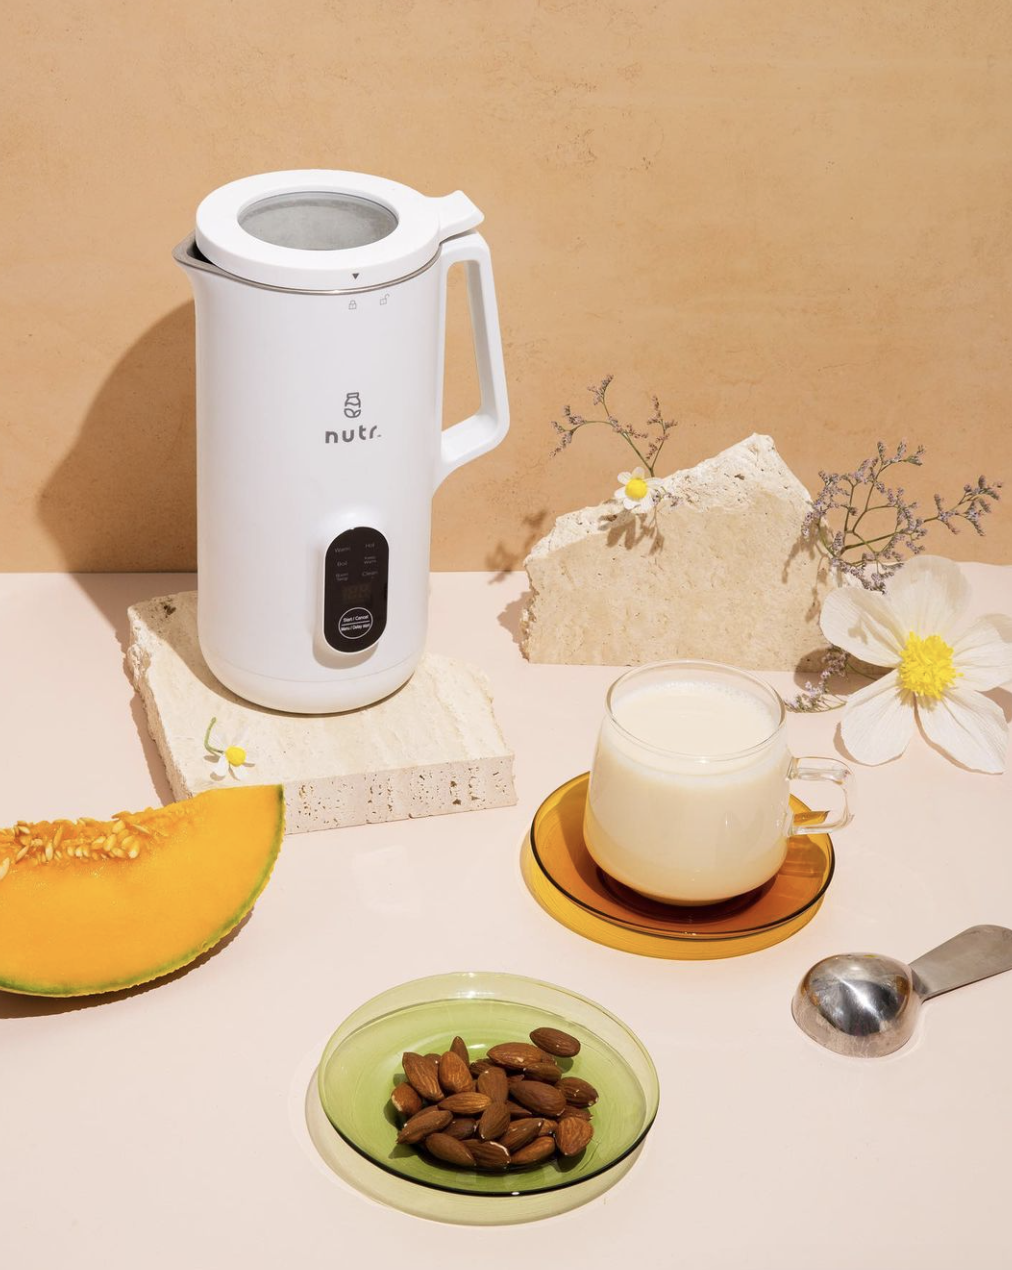 nut milk machine beside latte and plate of almonds with cantaloupe and flowers nearby